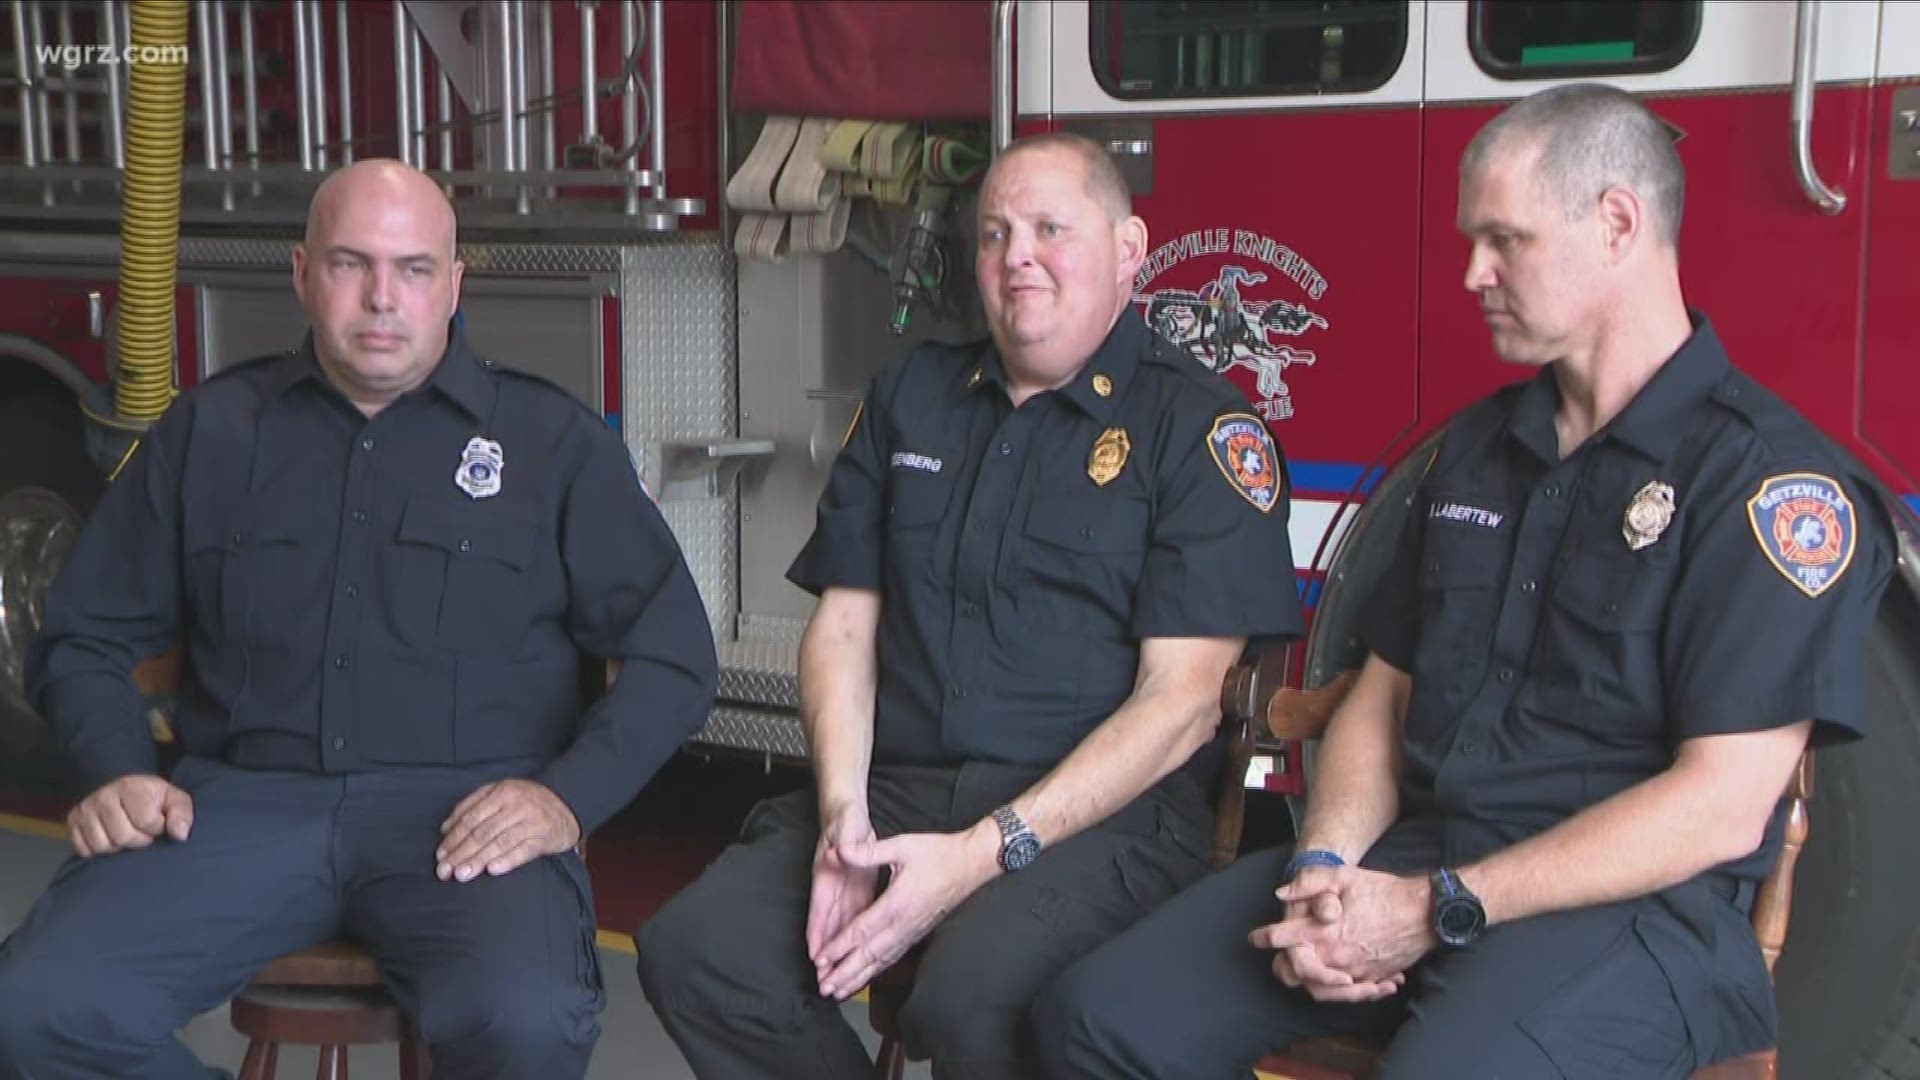 There's a group of local firefighters who rushed down to ground zero to help their brothers and sisters in uniform and they're sharing their story for the first time.